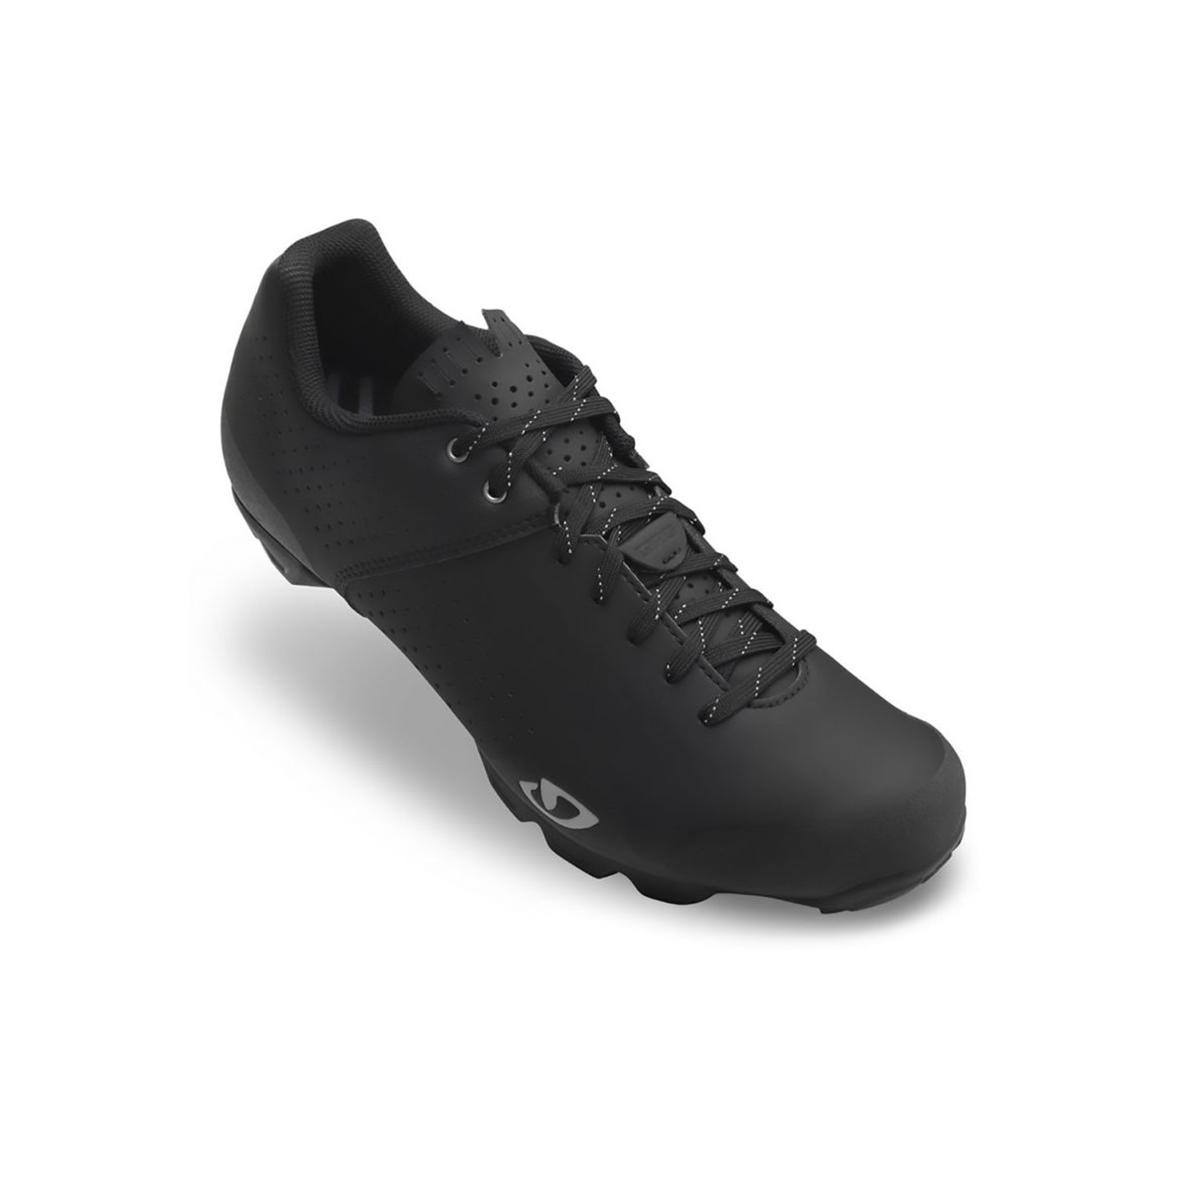 Chaussures VTT Privateer Lace Noir Taille 42